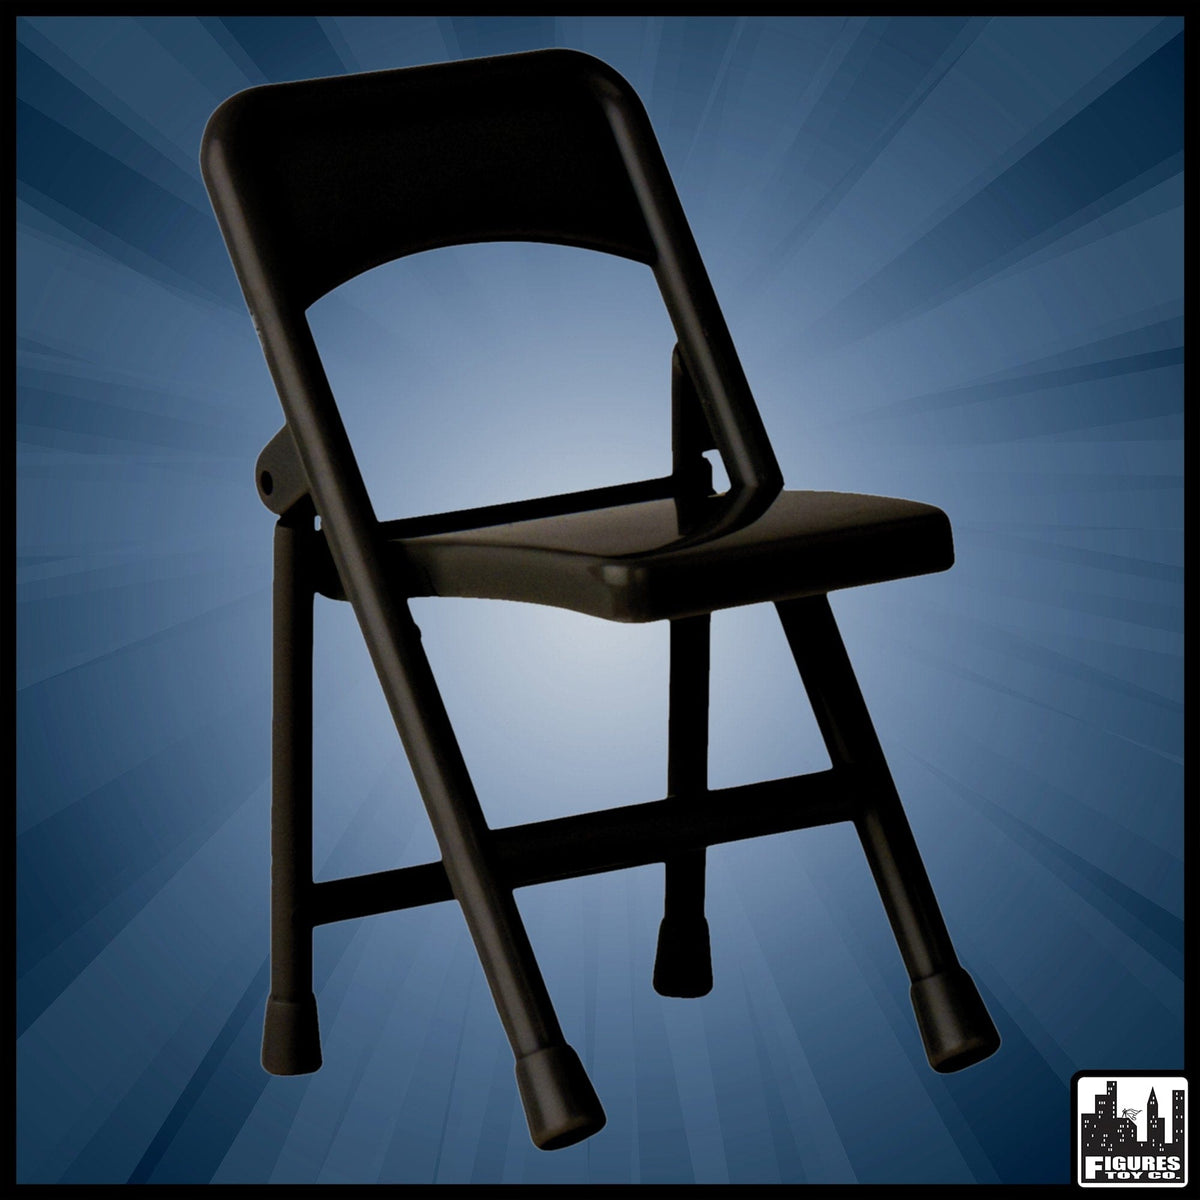 Black Plastic Toy Folding Chair for WWE Wrestling Action Figures